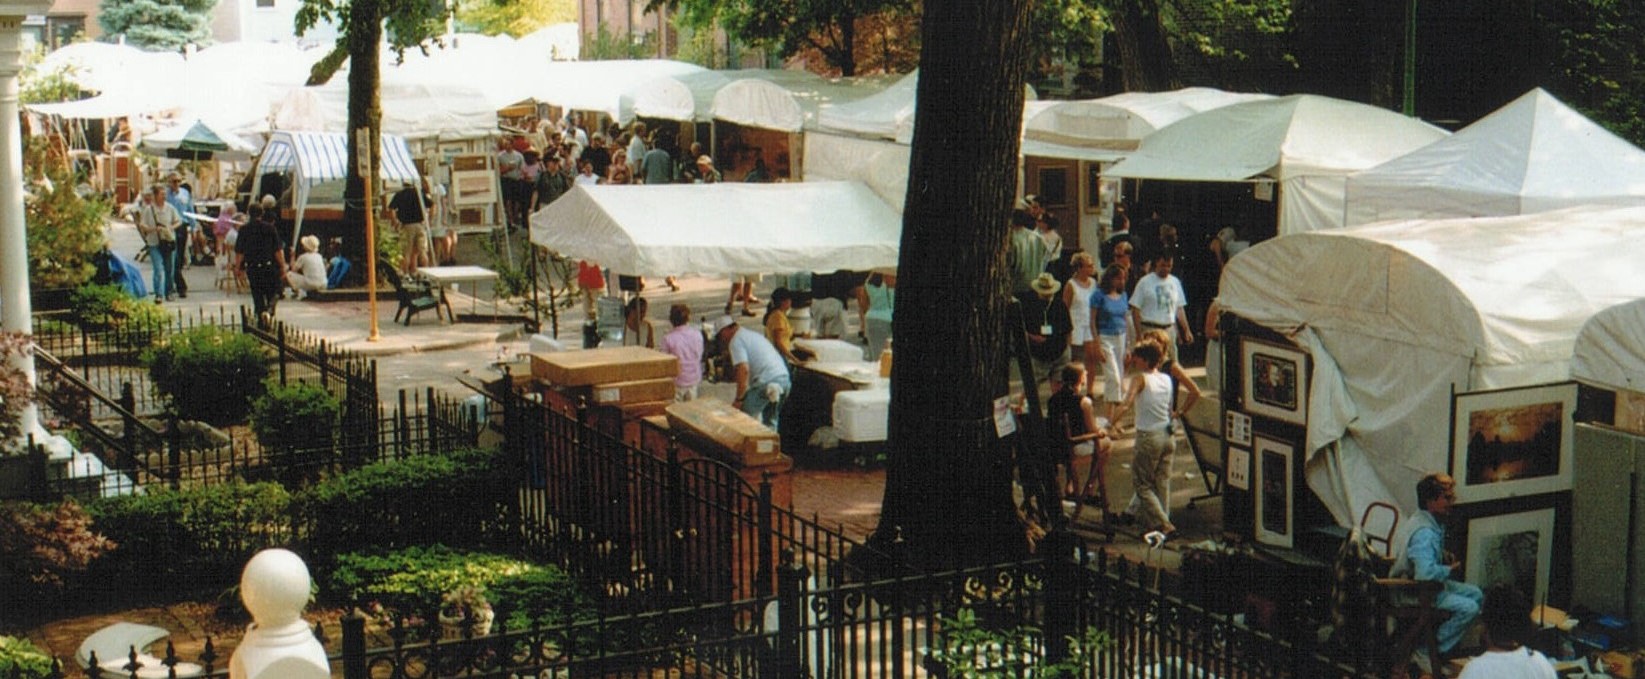 18-facts-about-old-town-art-fair